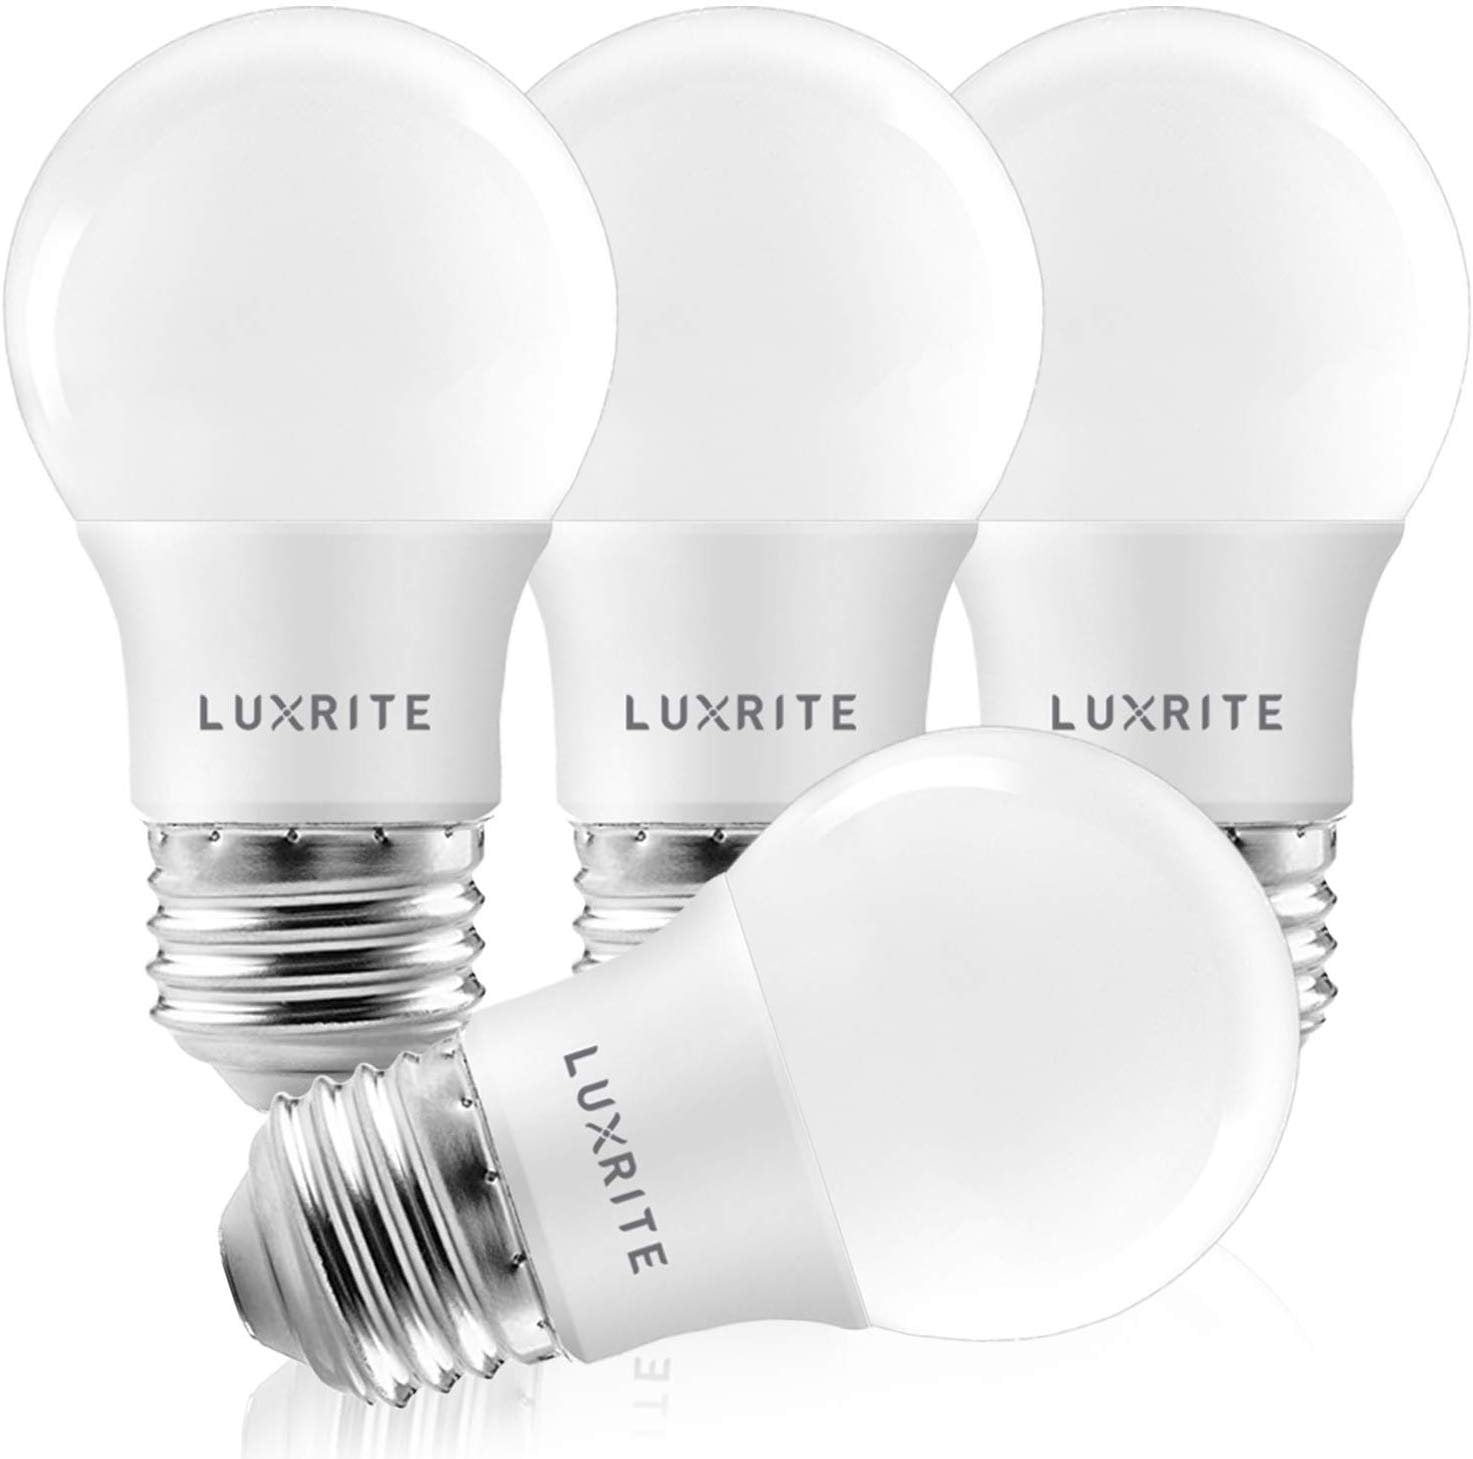 Great for Living Room 14W 1540 Lumens Medium Screw Base Non-Dimmable 75W Equivalent Daylight Glow Ceiling Light 6 Pack UL Lamps 4000K Hyperikon A19 LED Light Bulb E26 